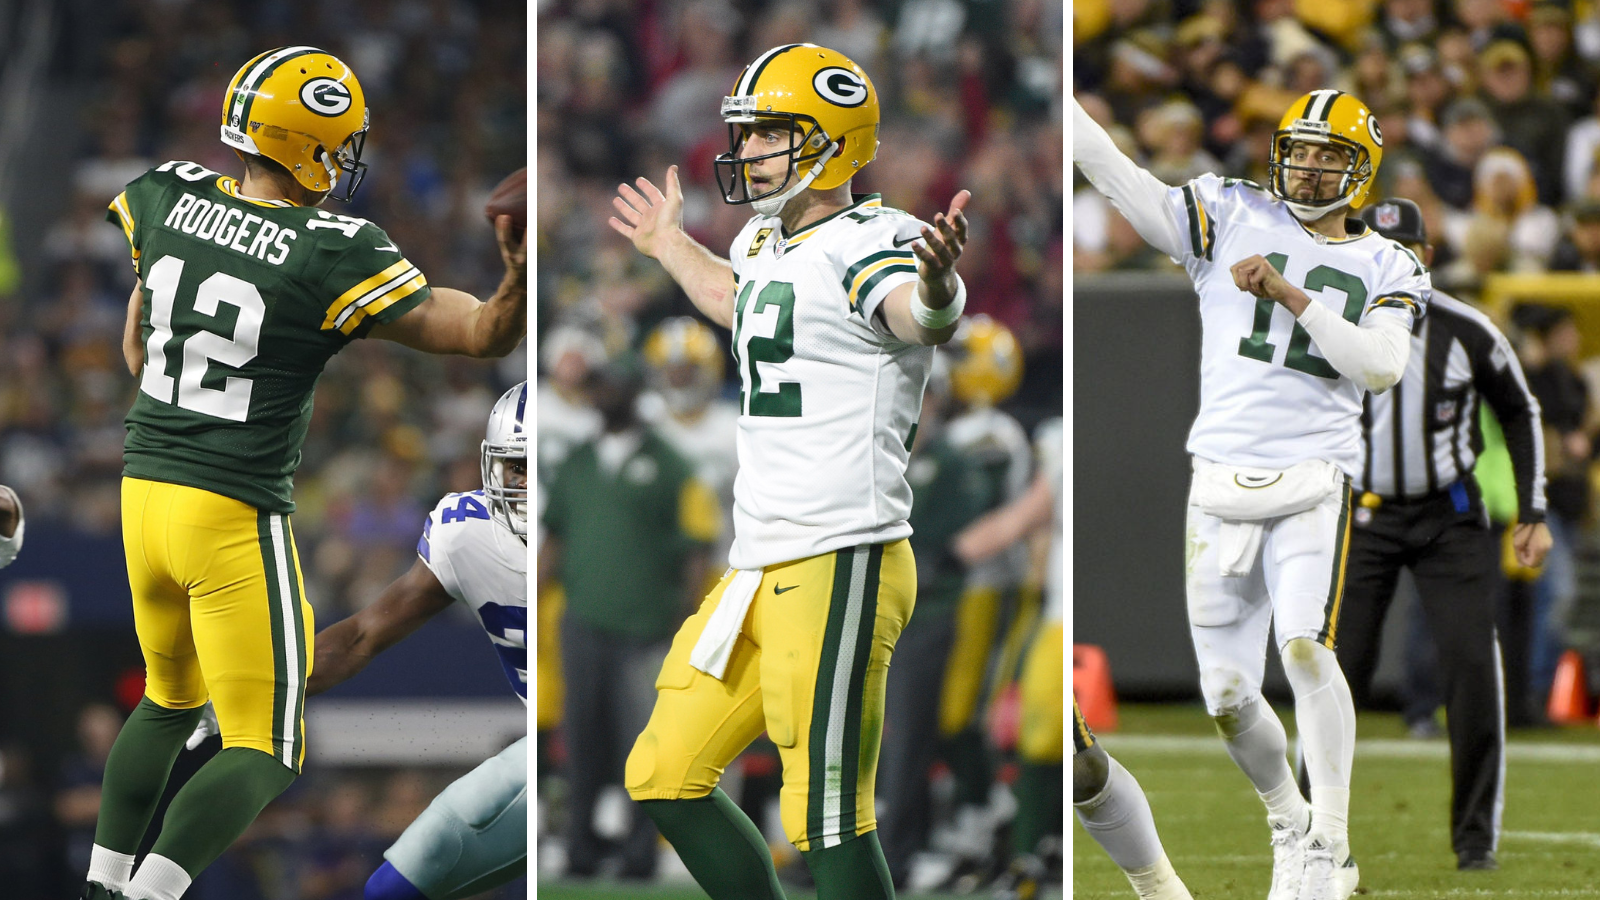 packers uniforms through the years